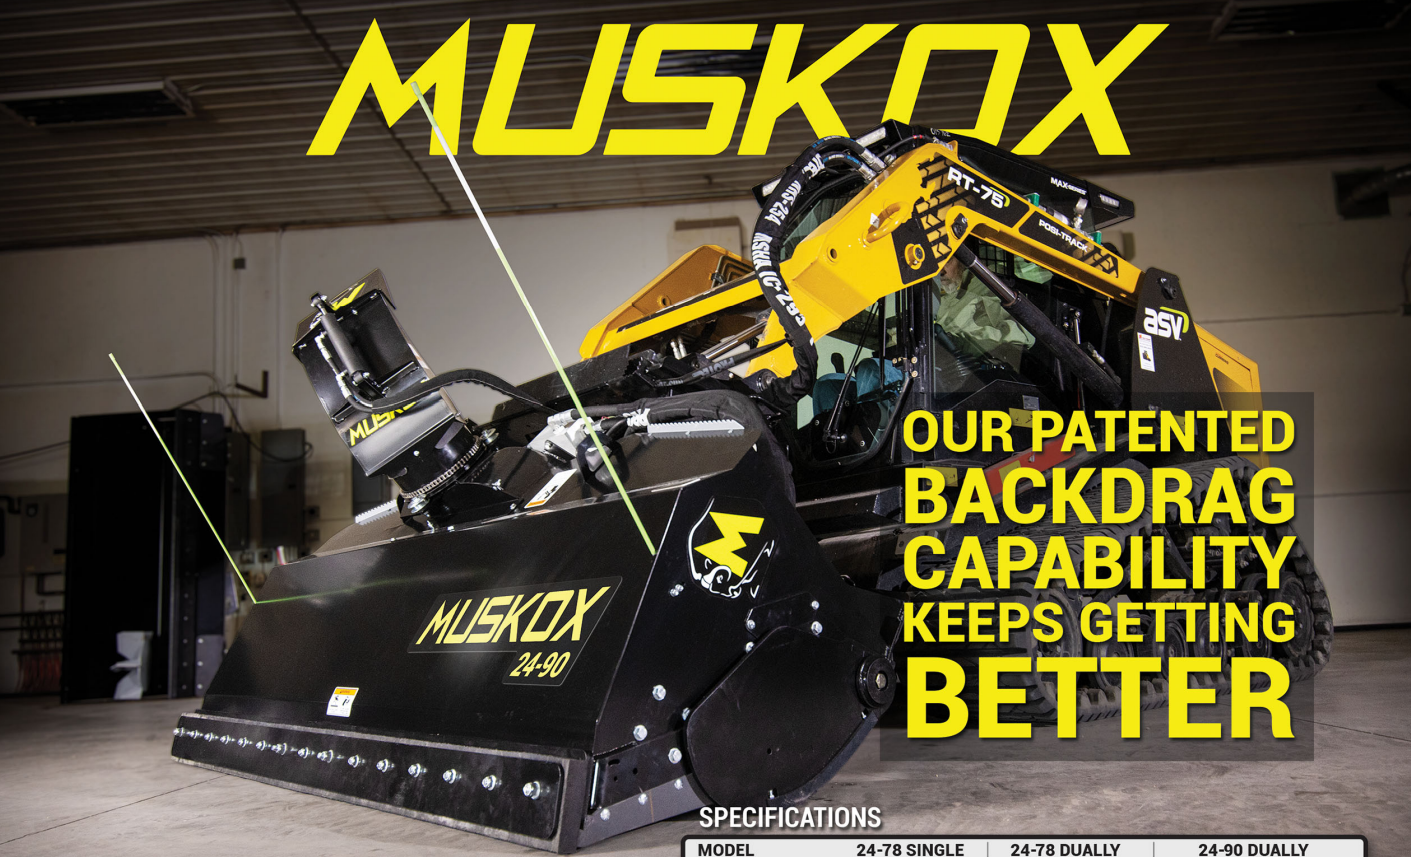 Muskox Skid Steer Snow Blower - The Snow Blower that Back Drags!